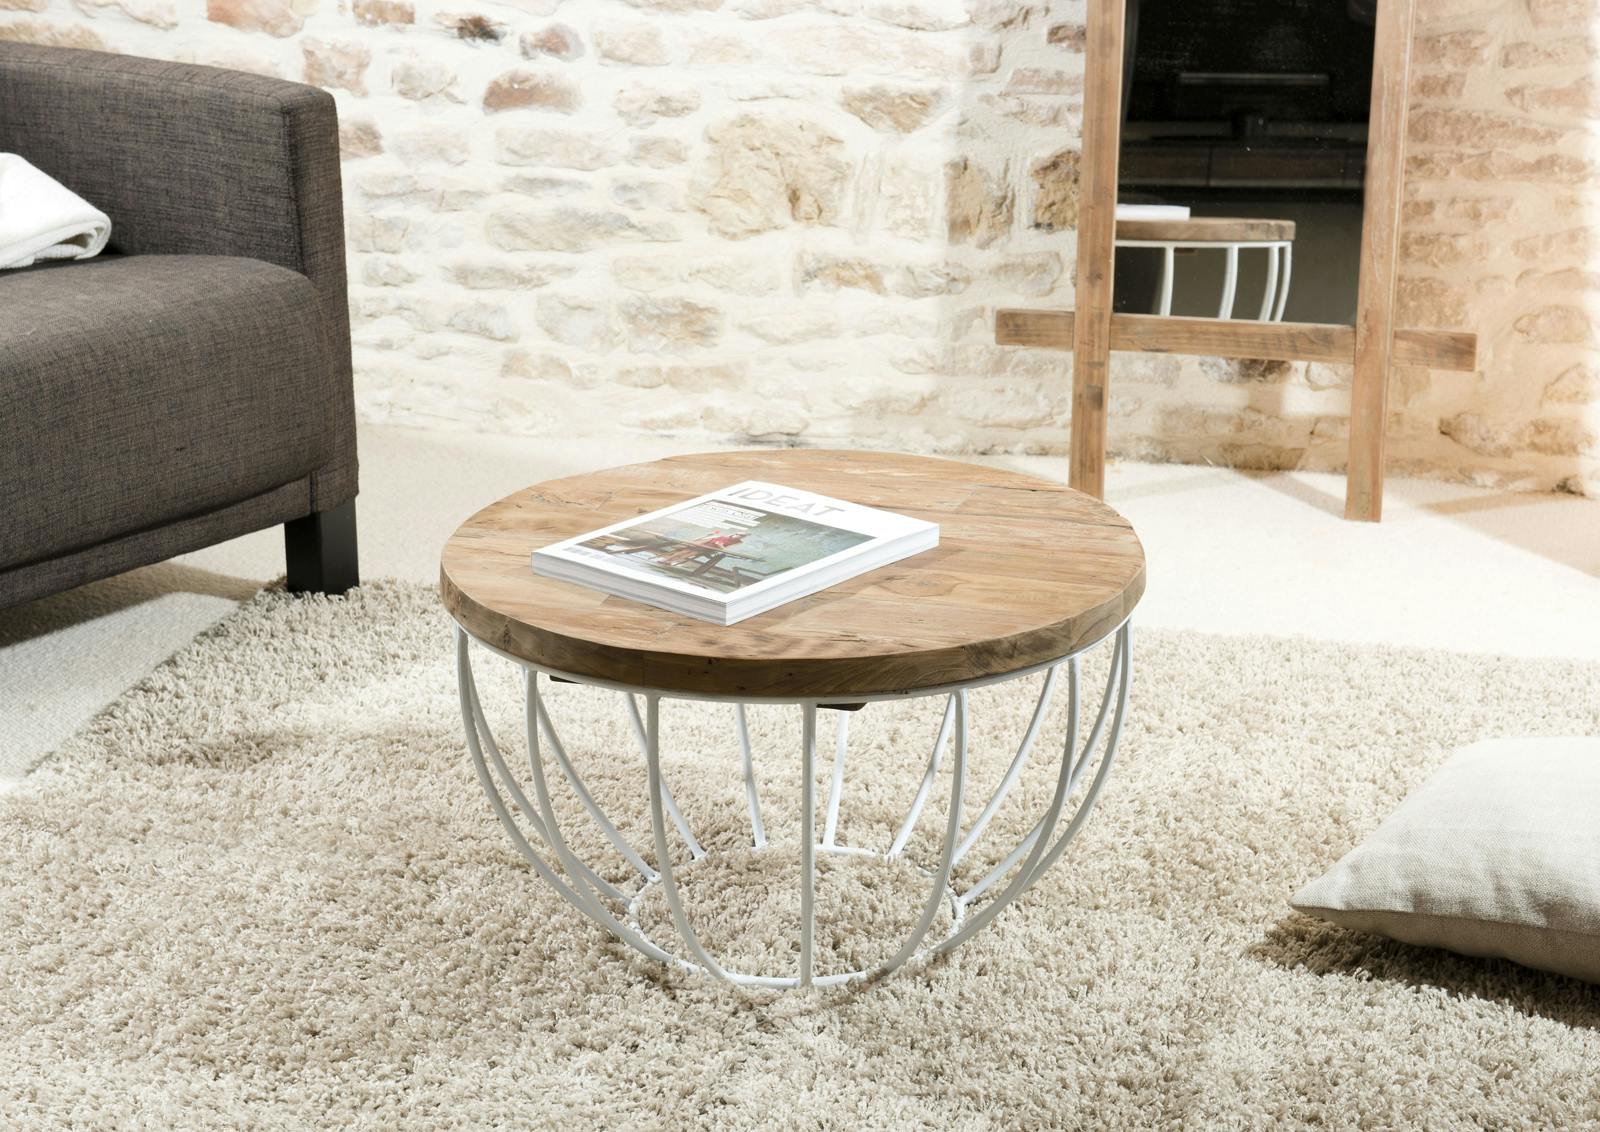 https://pierimport.imgix.net/produits/petite-table-basse-ronde-teck-recycle-structure-filaire-blanche-swing-5fe231e5ed713.jpg?auto=format